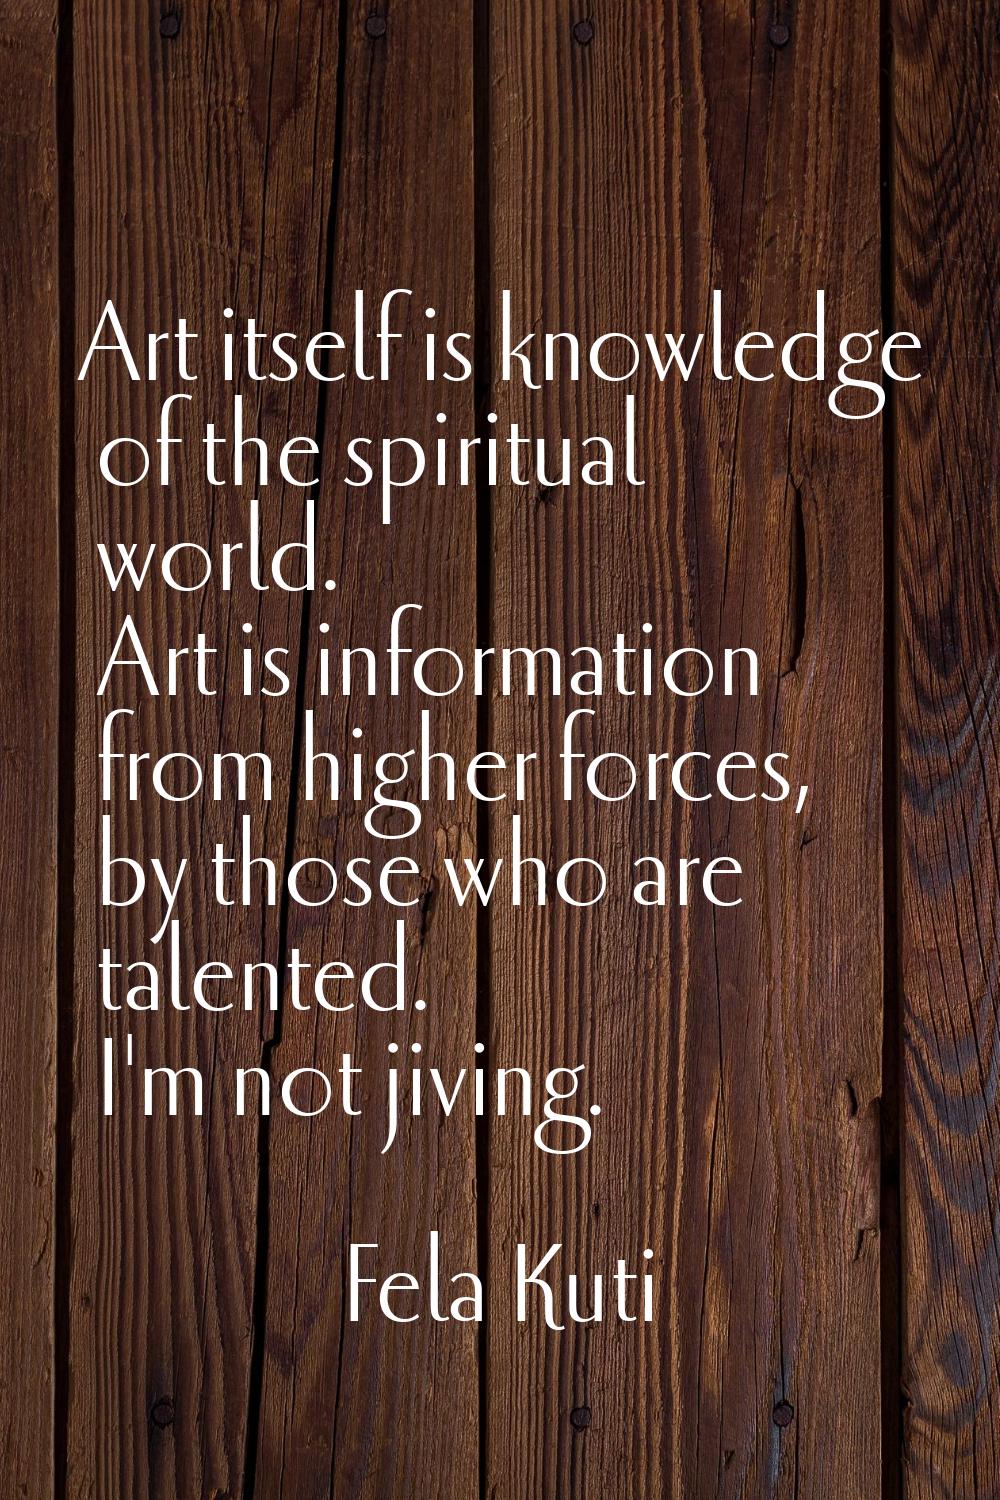 Art itself is knowledge of the spiritual world. Art is information from higher forces, by those who